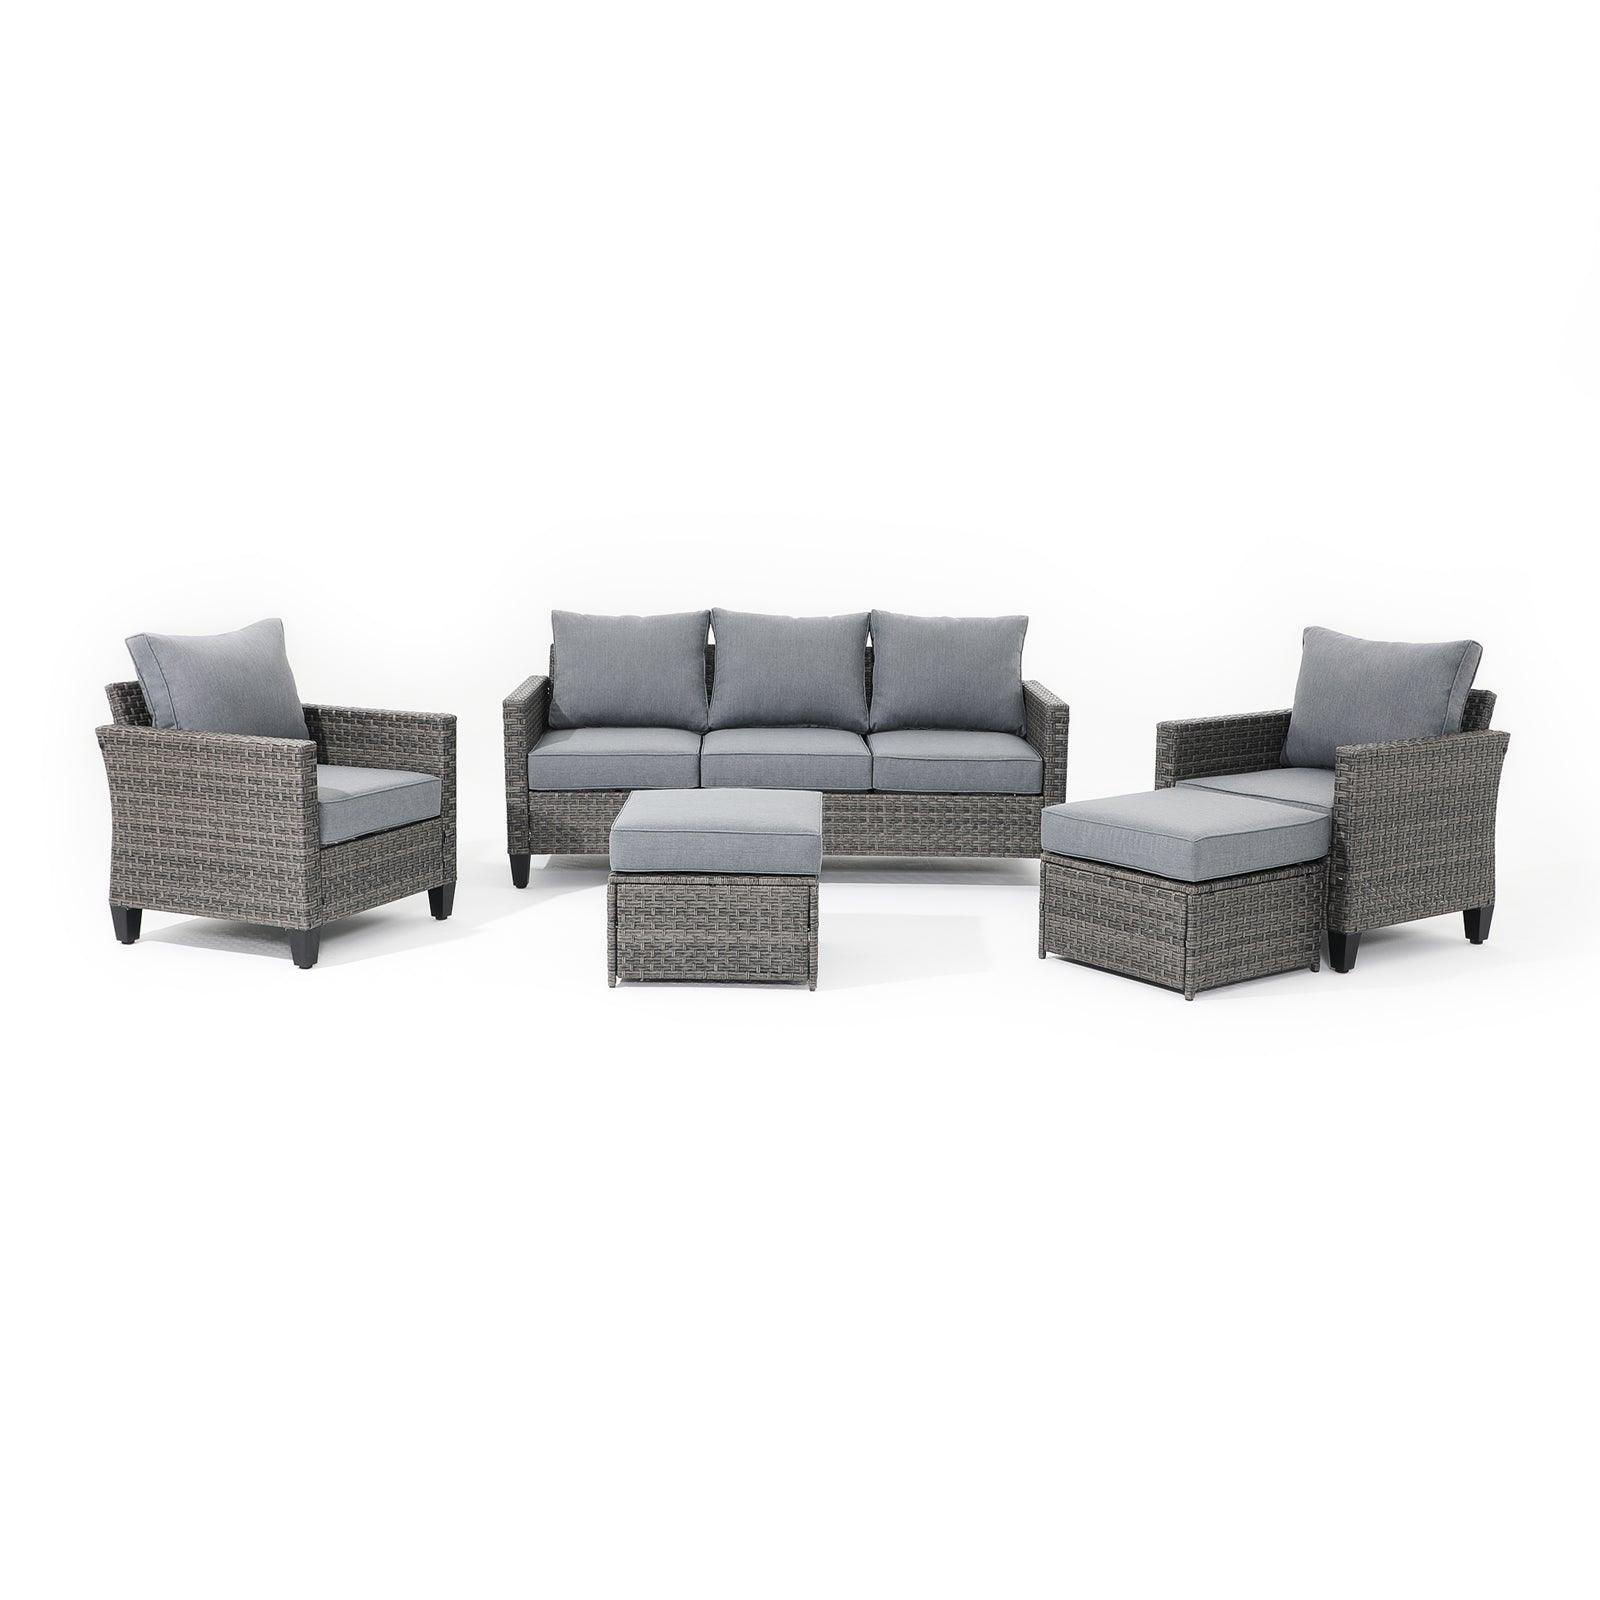 Ayia 5-Piece Grey wicker outdoor Sofa Set with grey cushions, a 3-seater sofa, 2 arm chairs , 2 ottomans - Jardina Furniture #Piece_5-pc#Color_Grey#Style_with Ottomans